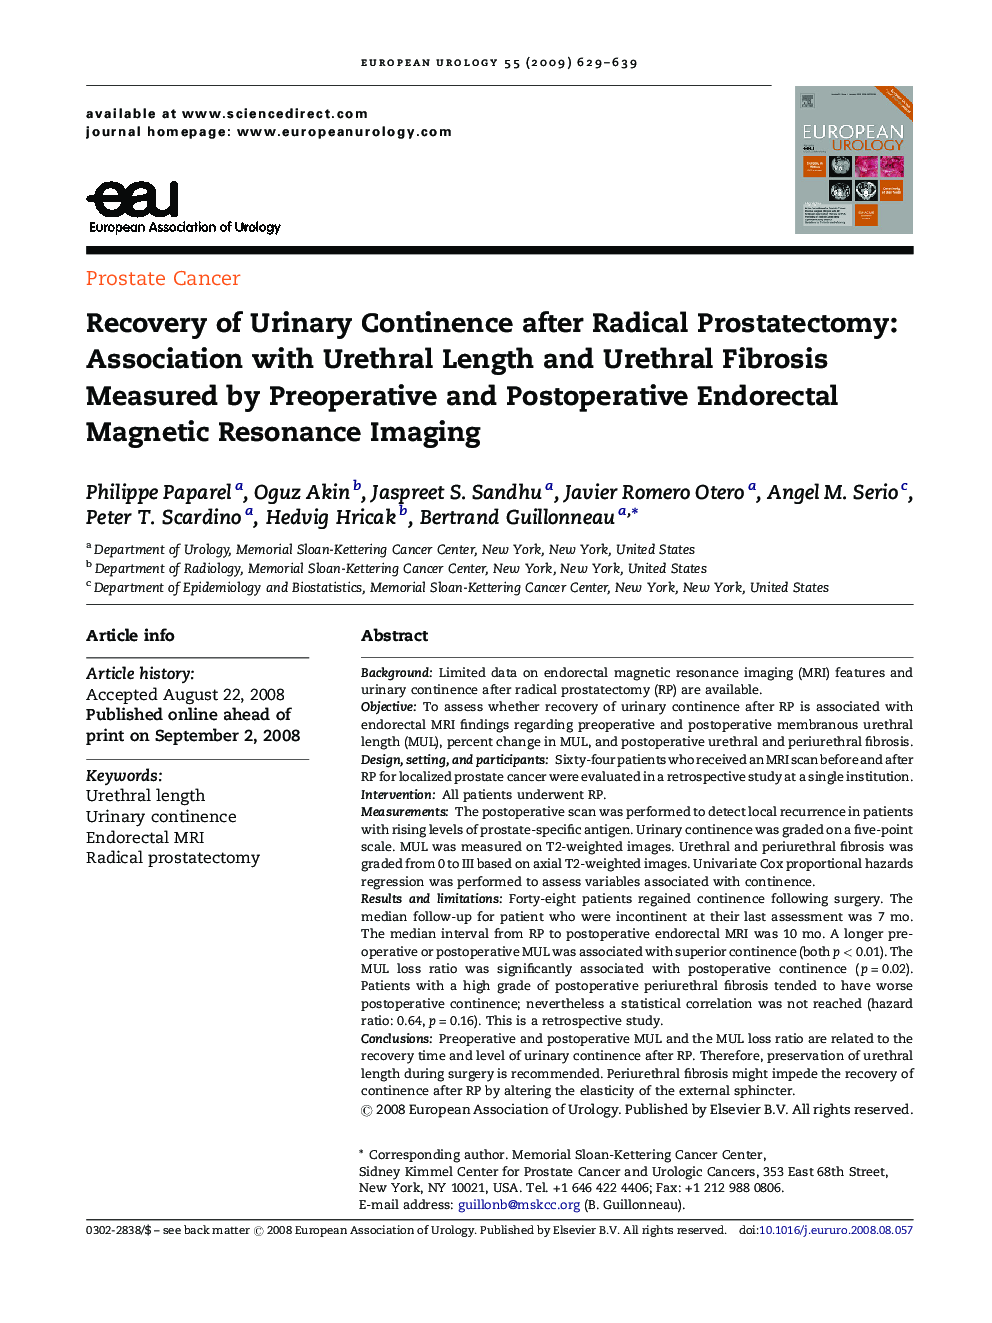 Recovery of Urinary Continence after Radical Prostatectomy: Association with Urethral Length and Urethral Fibrosis Measured by Preoperative and Postoperative Endorectal Magnetic Resonance Imaging